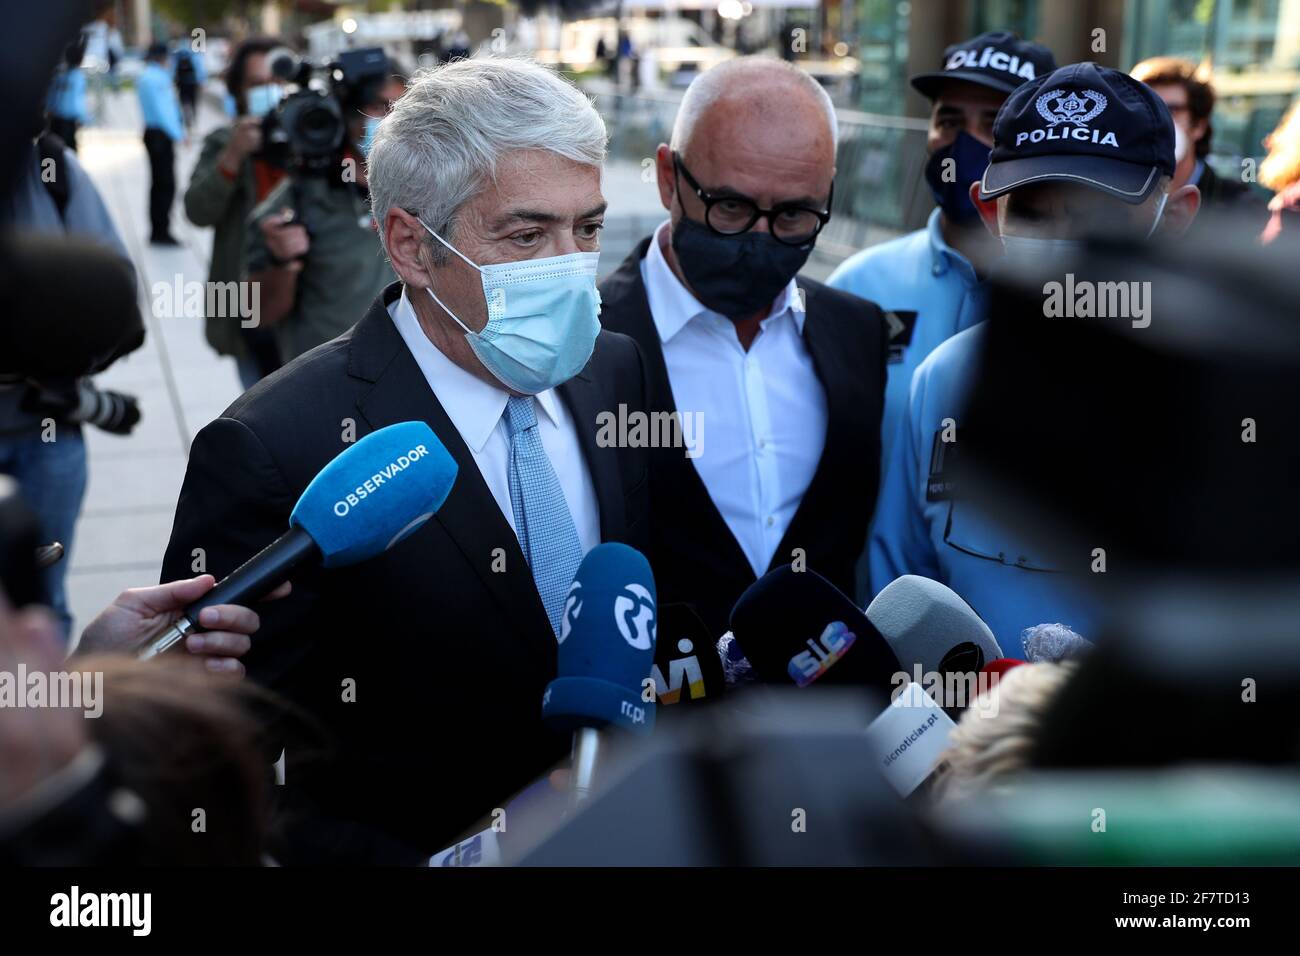 Lisbon, Portugal. 9th Apr, 2021. Portugal's former Prime Minister Jose Socrates wearing a face mask speaks to journalists as he leaves the court after the instructional decision session of the high-profile corruption case known as Operation Marques, at the Justice Campus in Lisbon, Portugal, 09 April 2021. Credit: Pedro Fiuza/ZUMA Wire/Alamy Live News Stock Photo